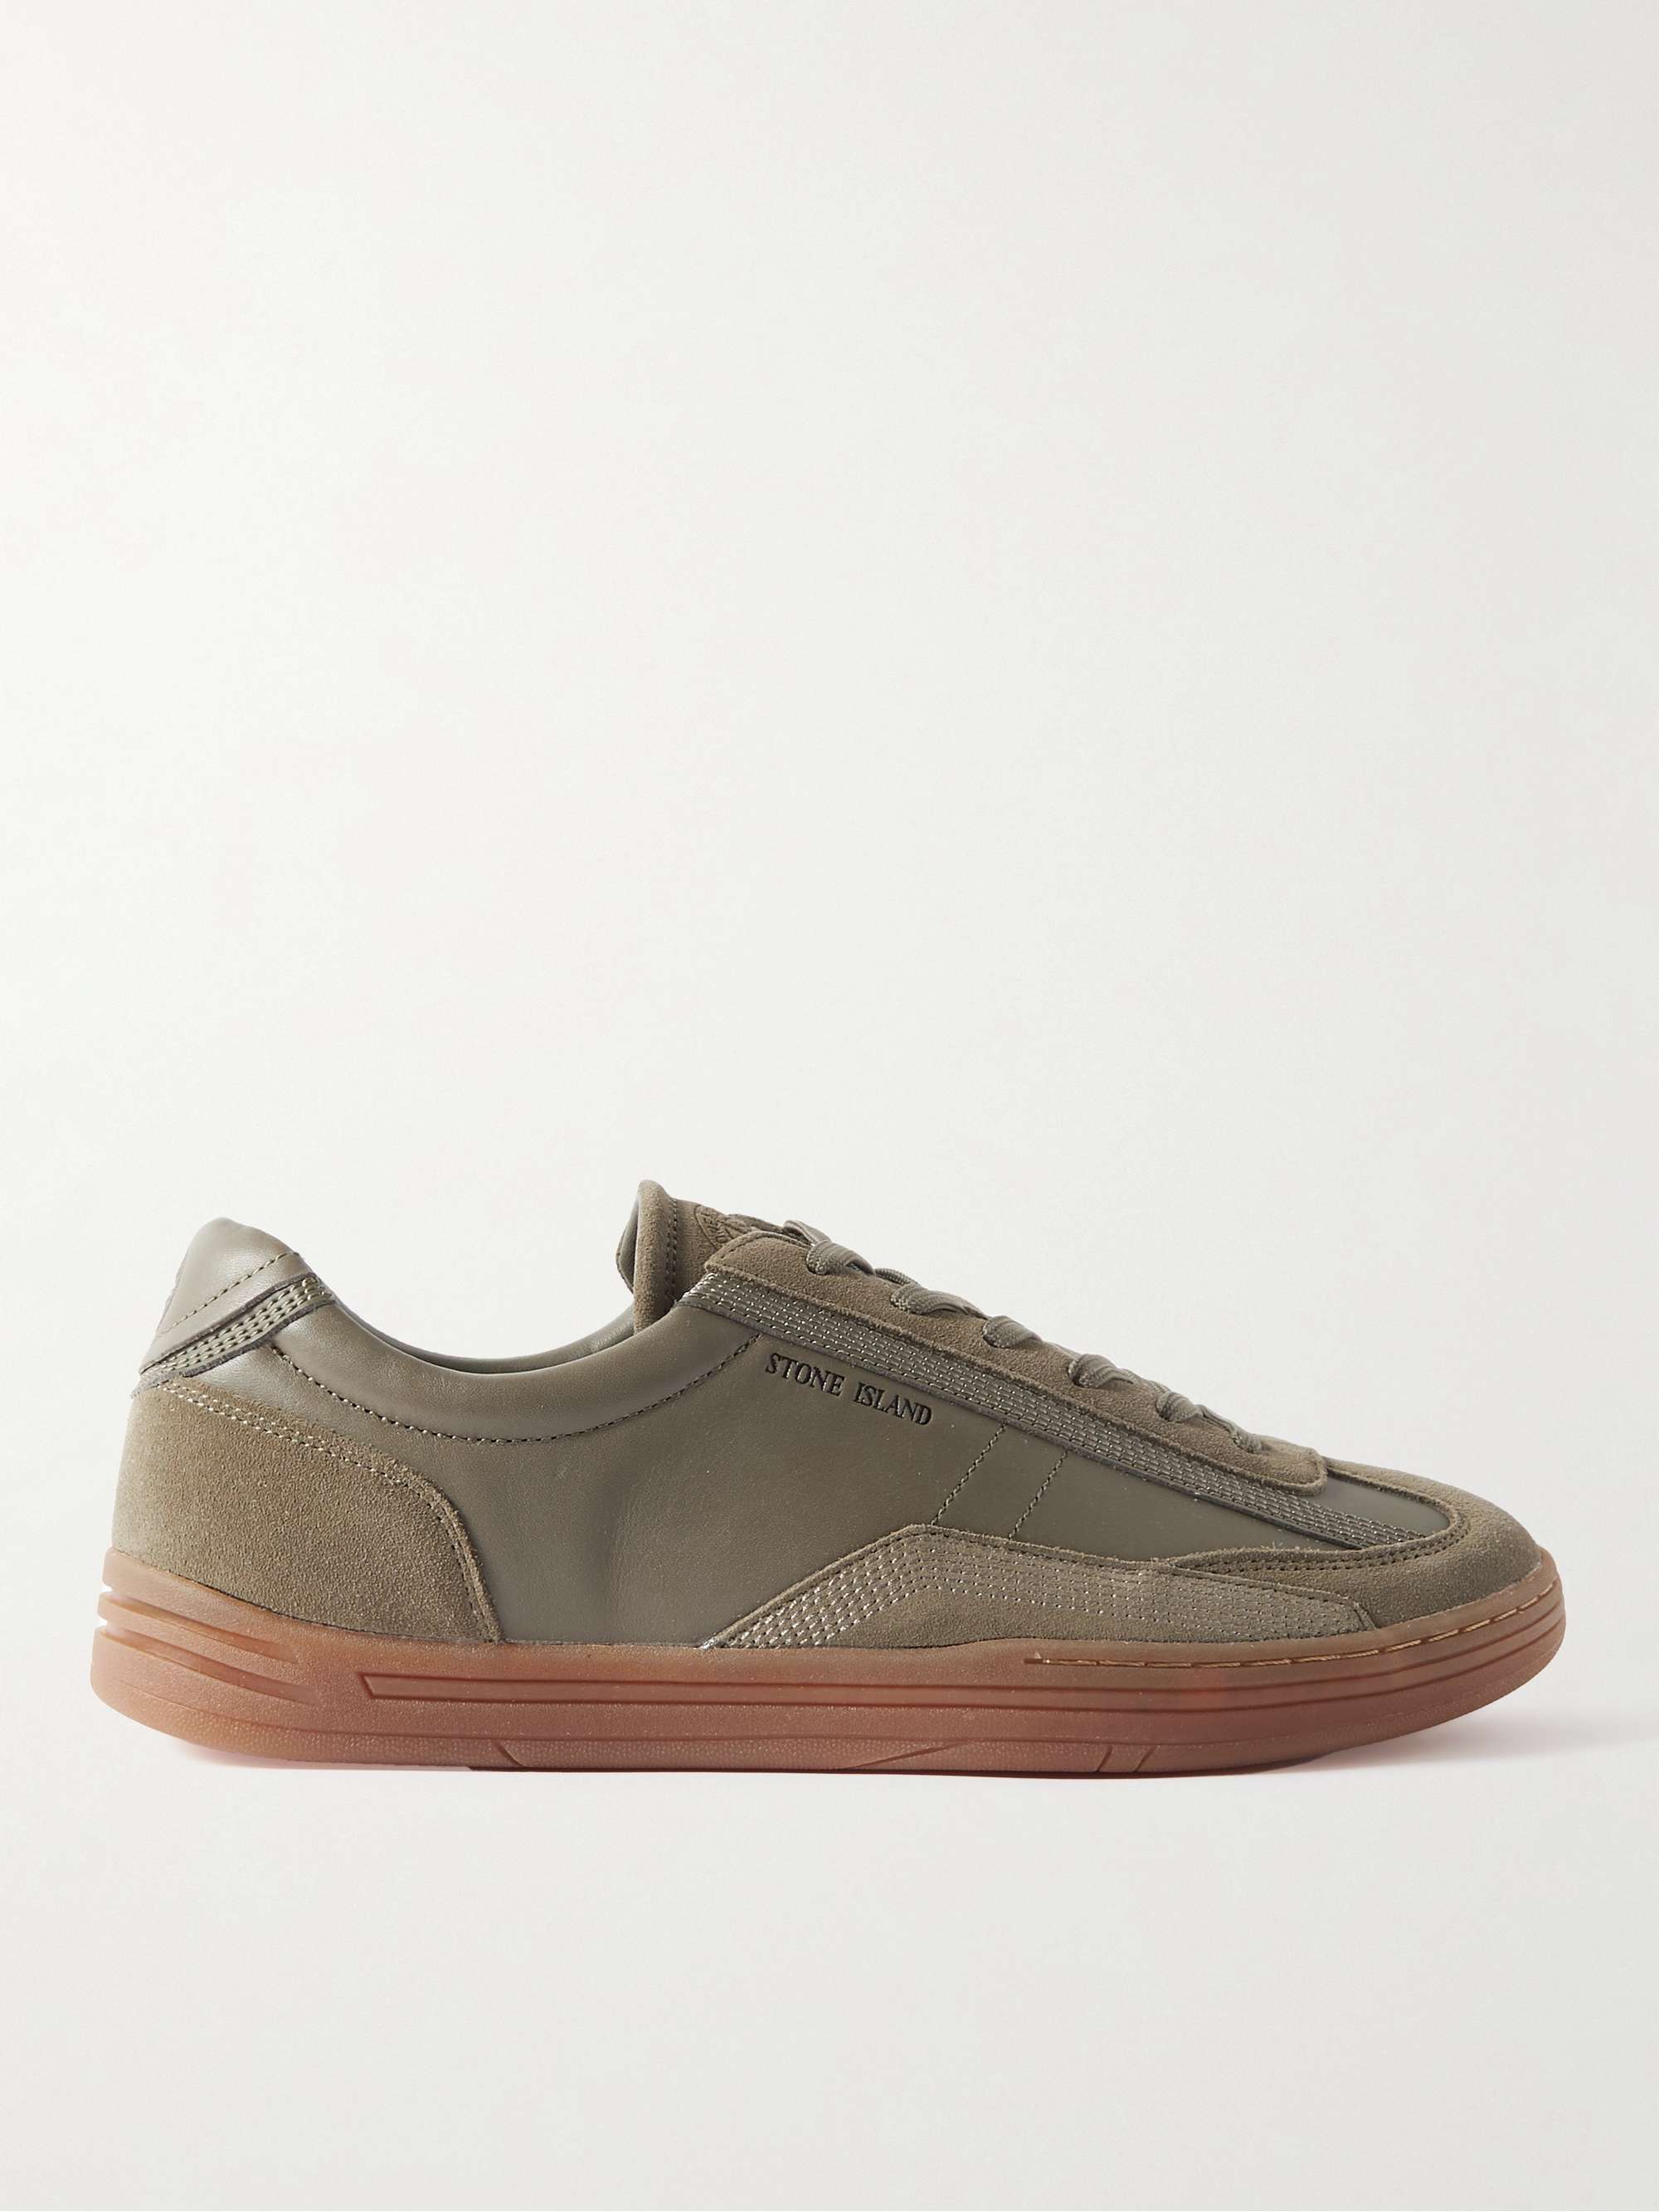 STONE ISLAND Rock Suede-Trimmed Leather Sneakers